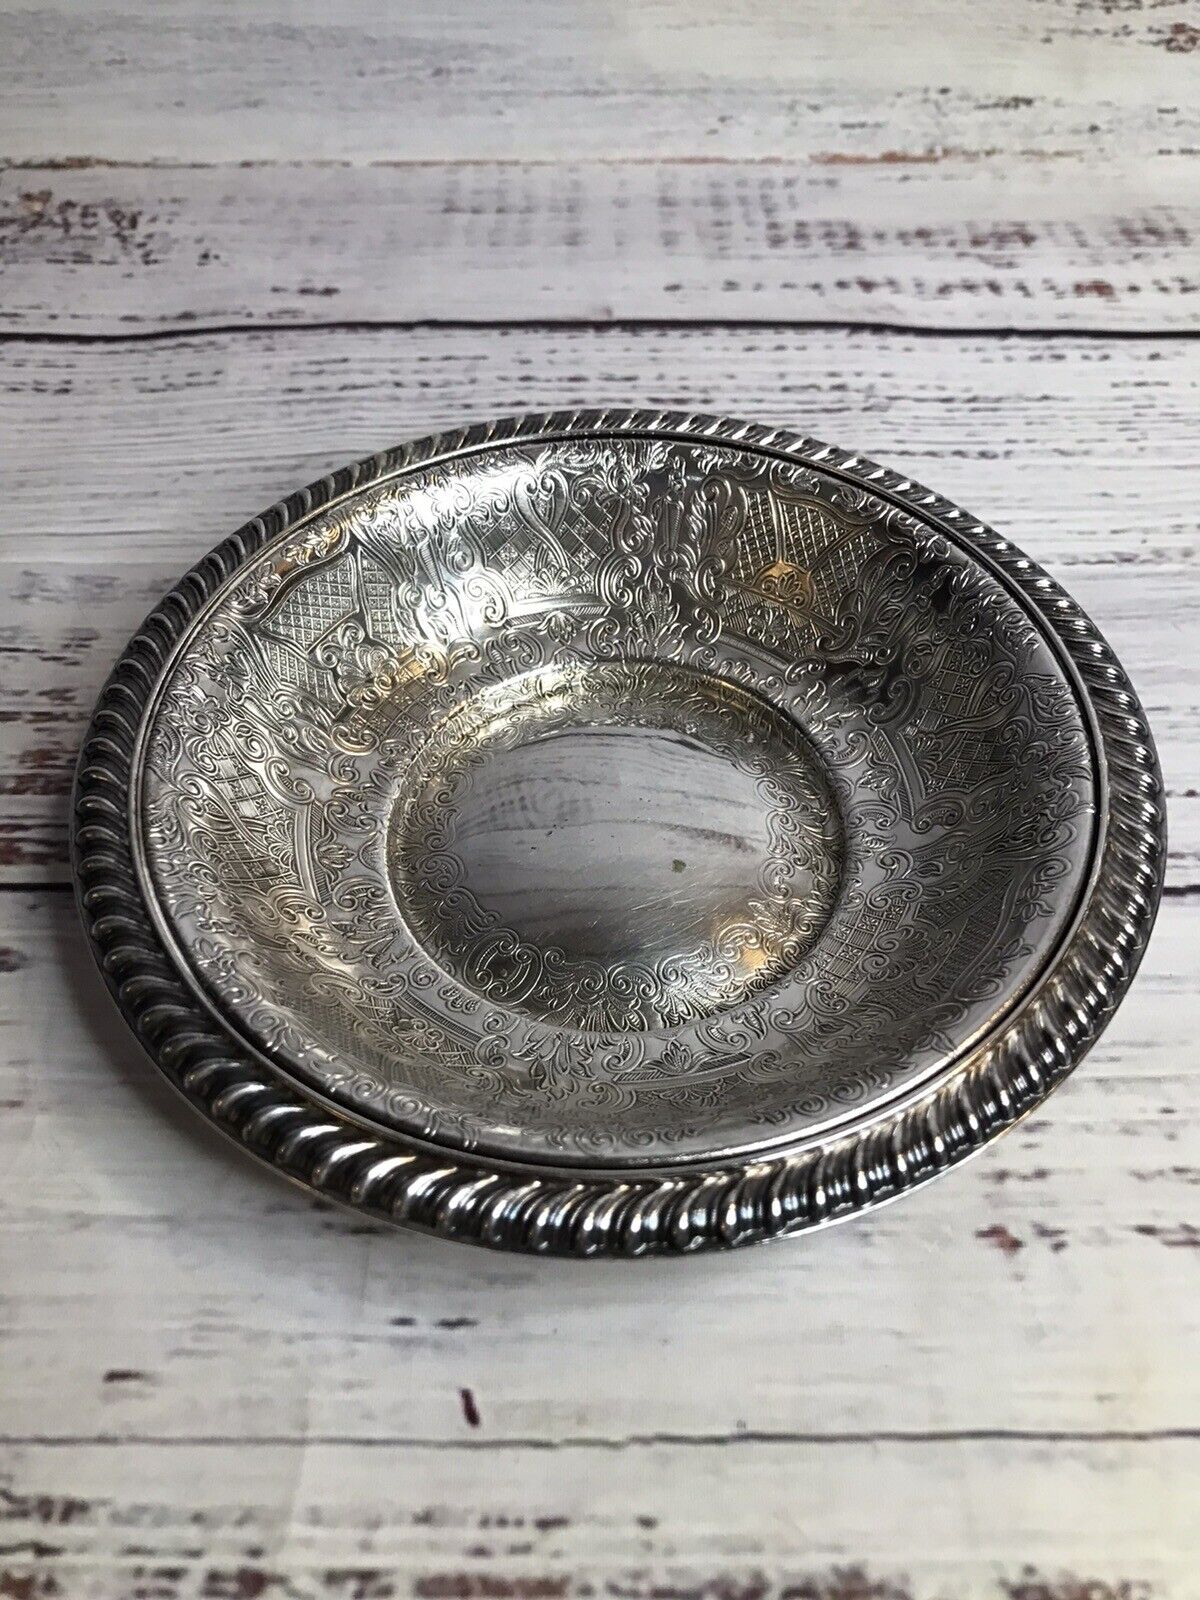 Vintage Capital Silverplate Ornate Bowl 5.75in E.P.N.S. Made in England